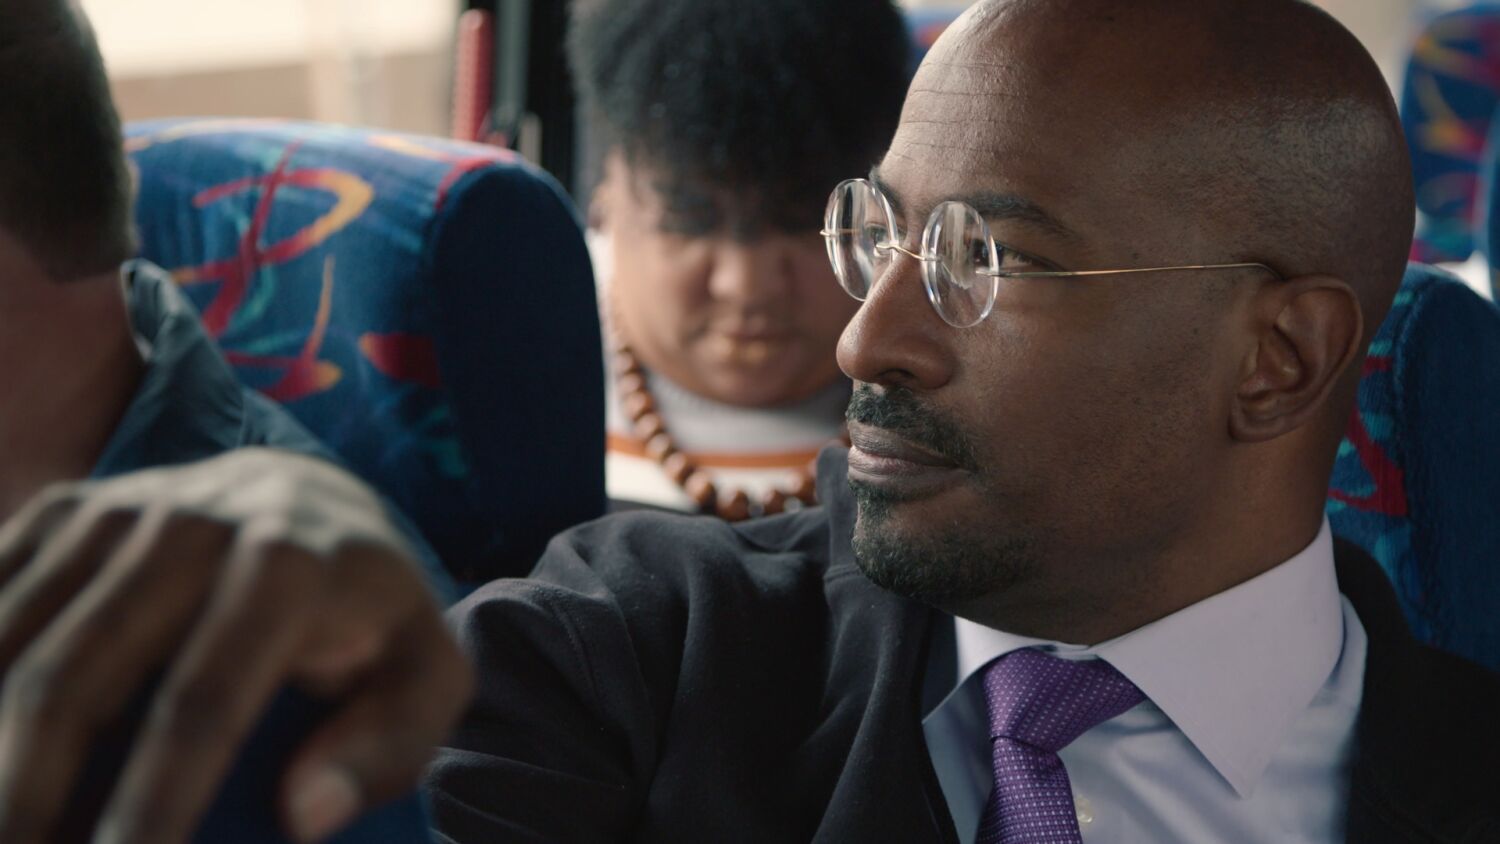 Liberals and conservatives can find common ground. Van Jones' newly streaming movie shows how